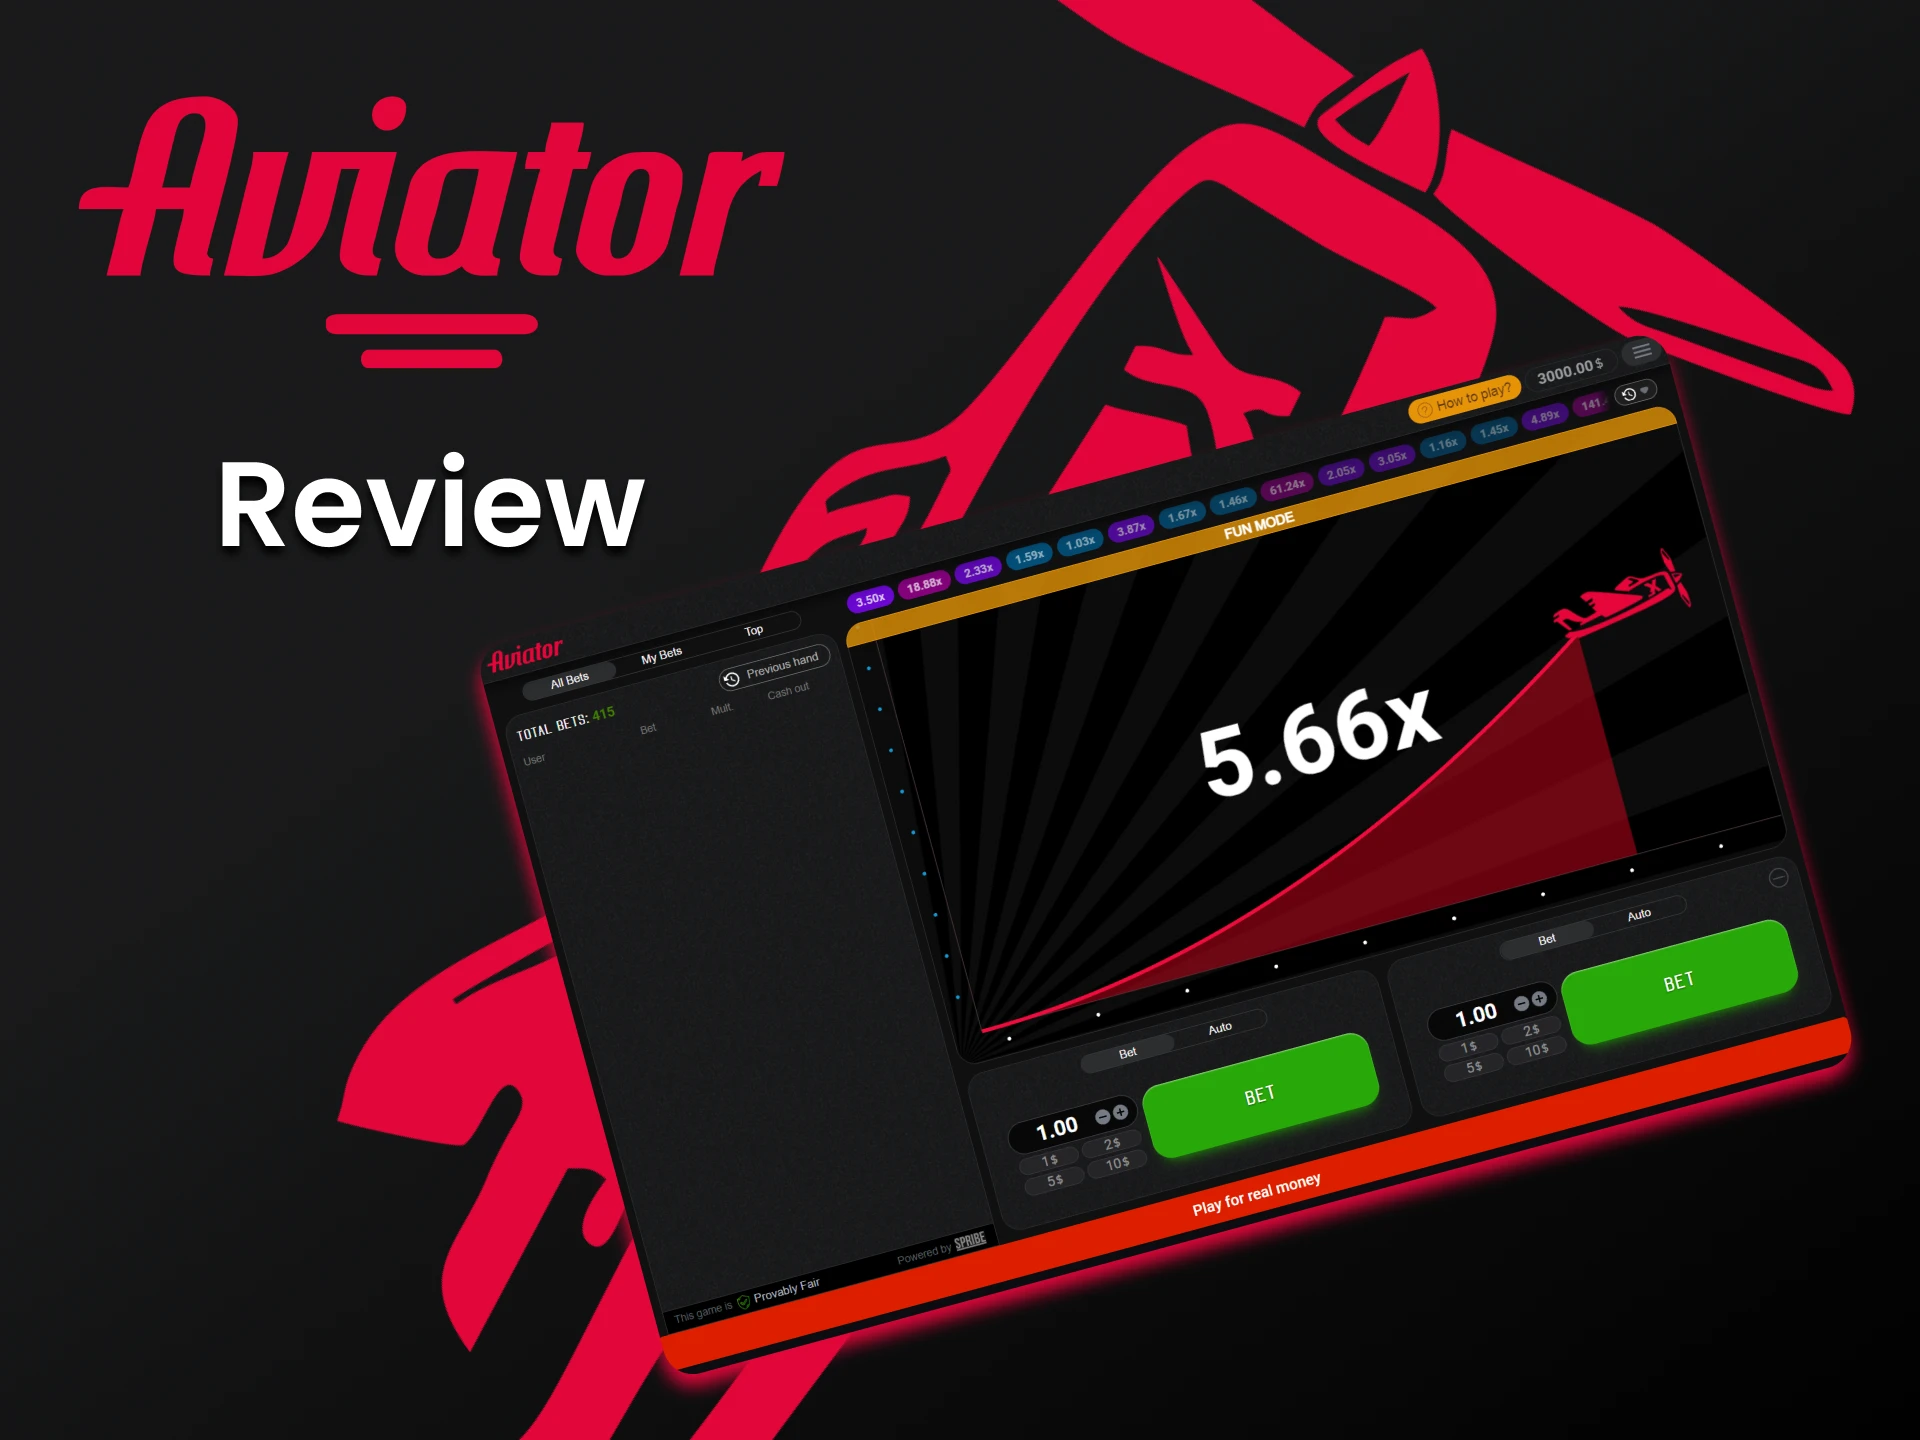 In order not to lose money and get more experience, choose the Demo version of the Aviator game.